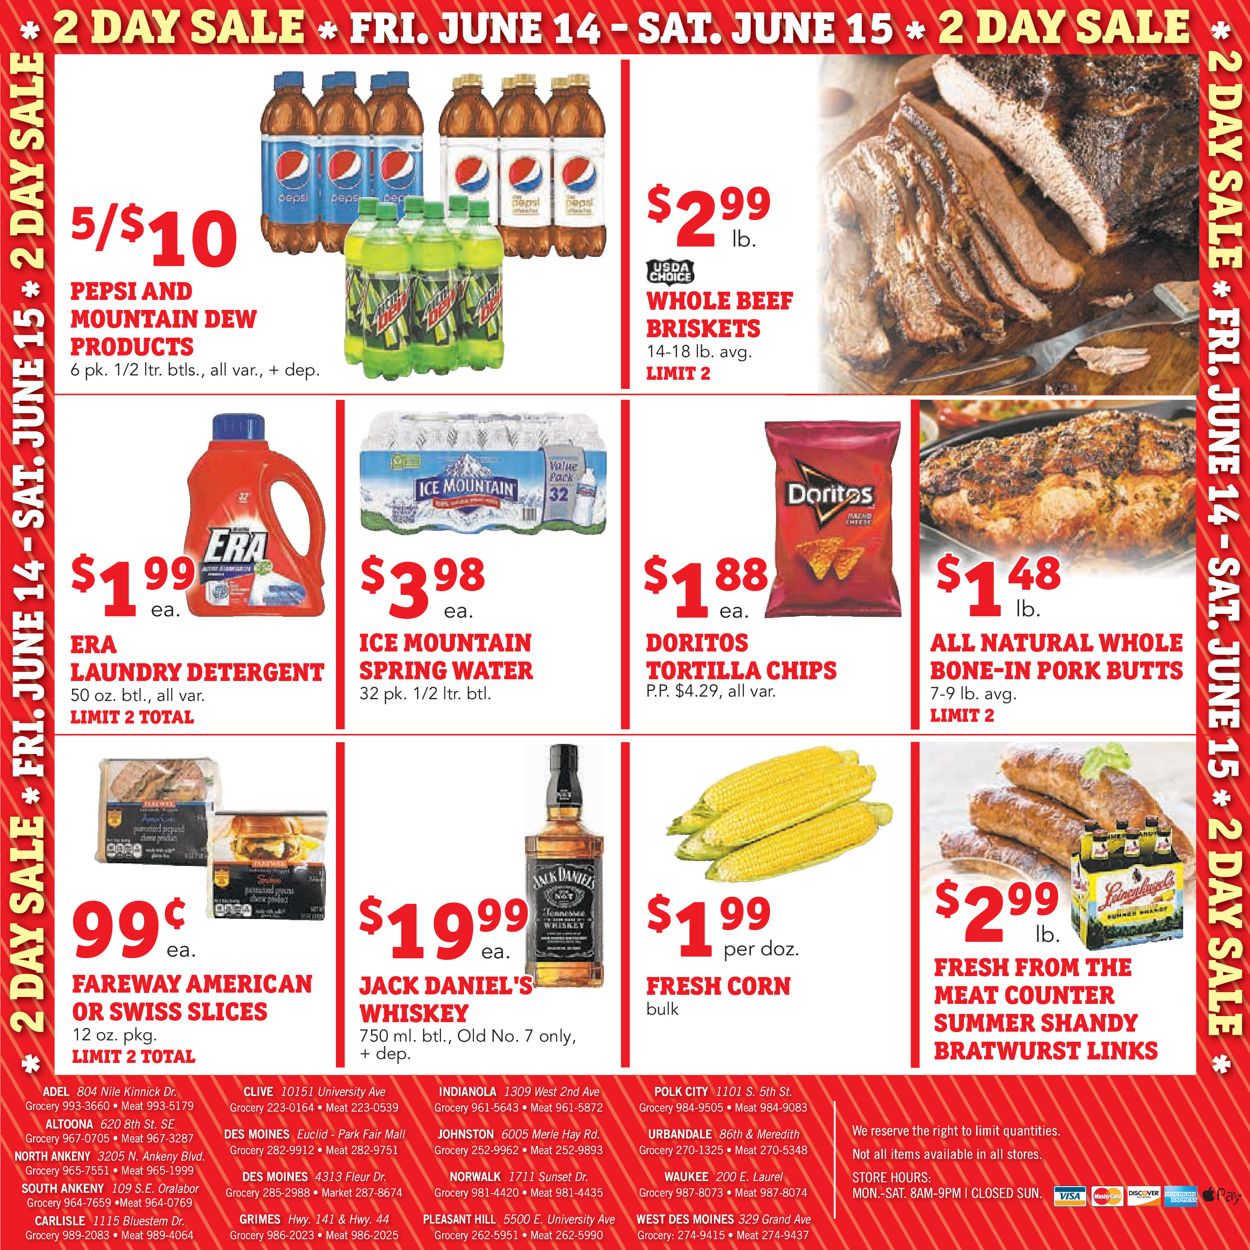 Fareway Ad from 06/11/2019